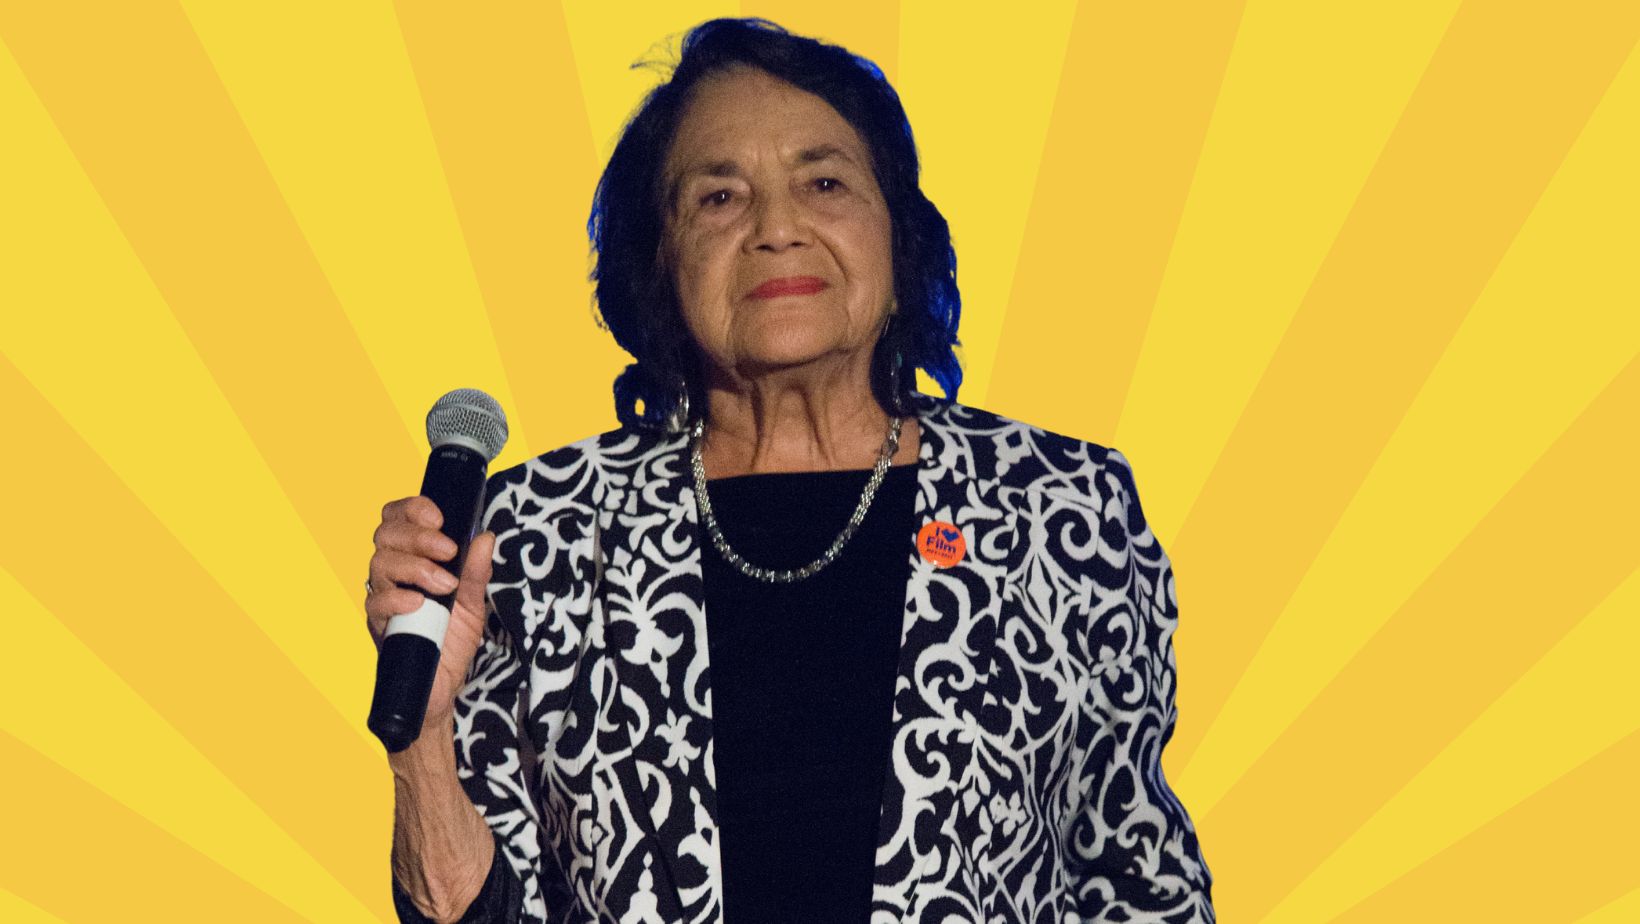 LATINAFest Will Honor Chicana Activist Dolores Huerta During Their Fifth Annual Extravaganza